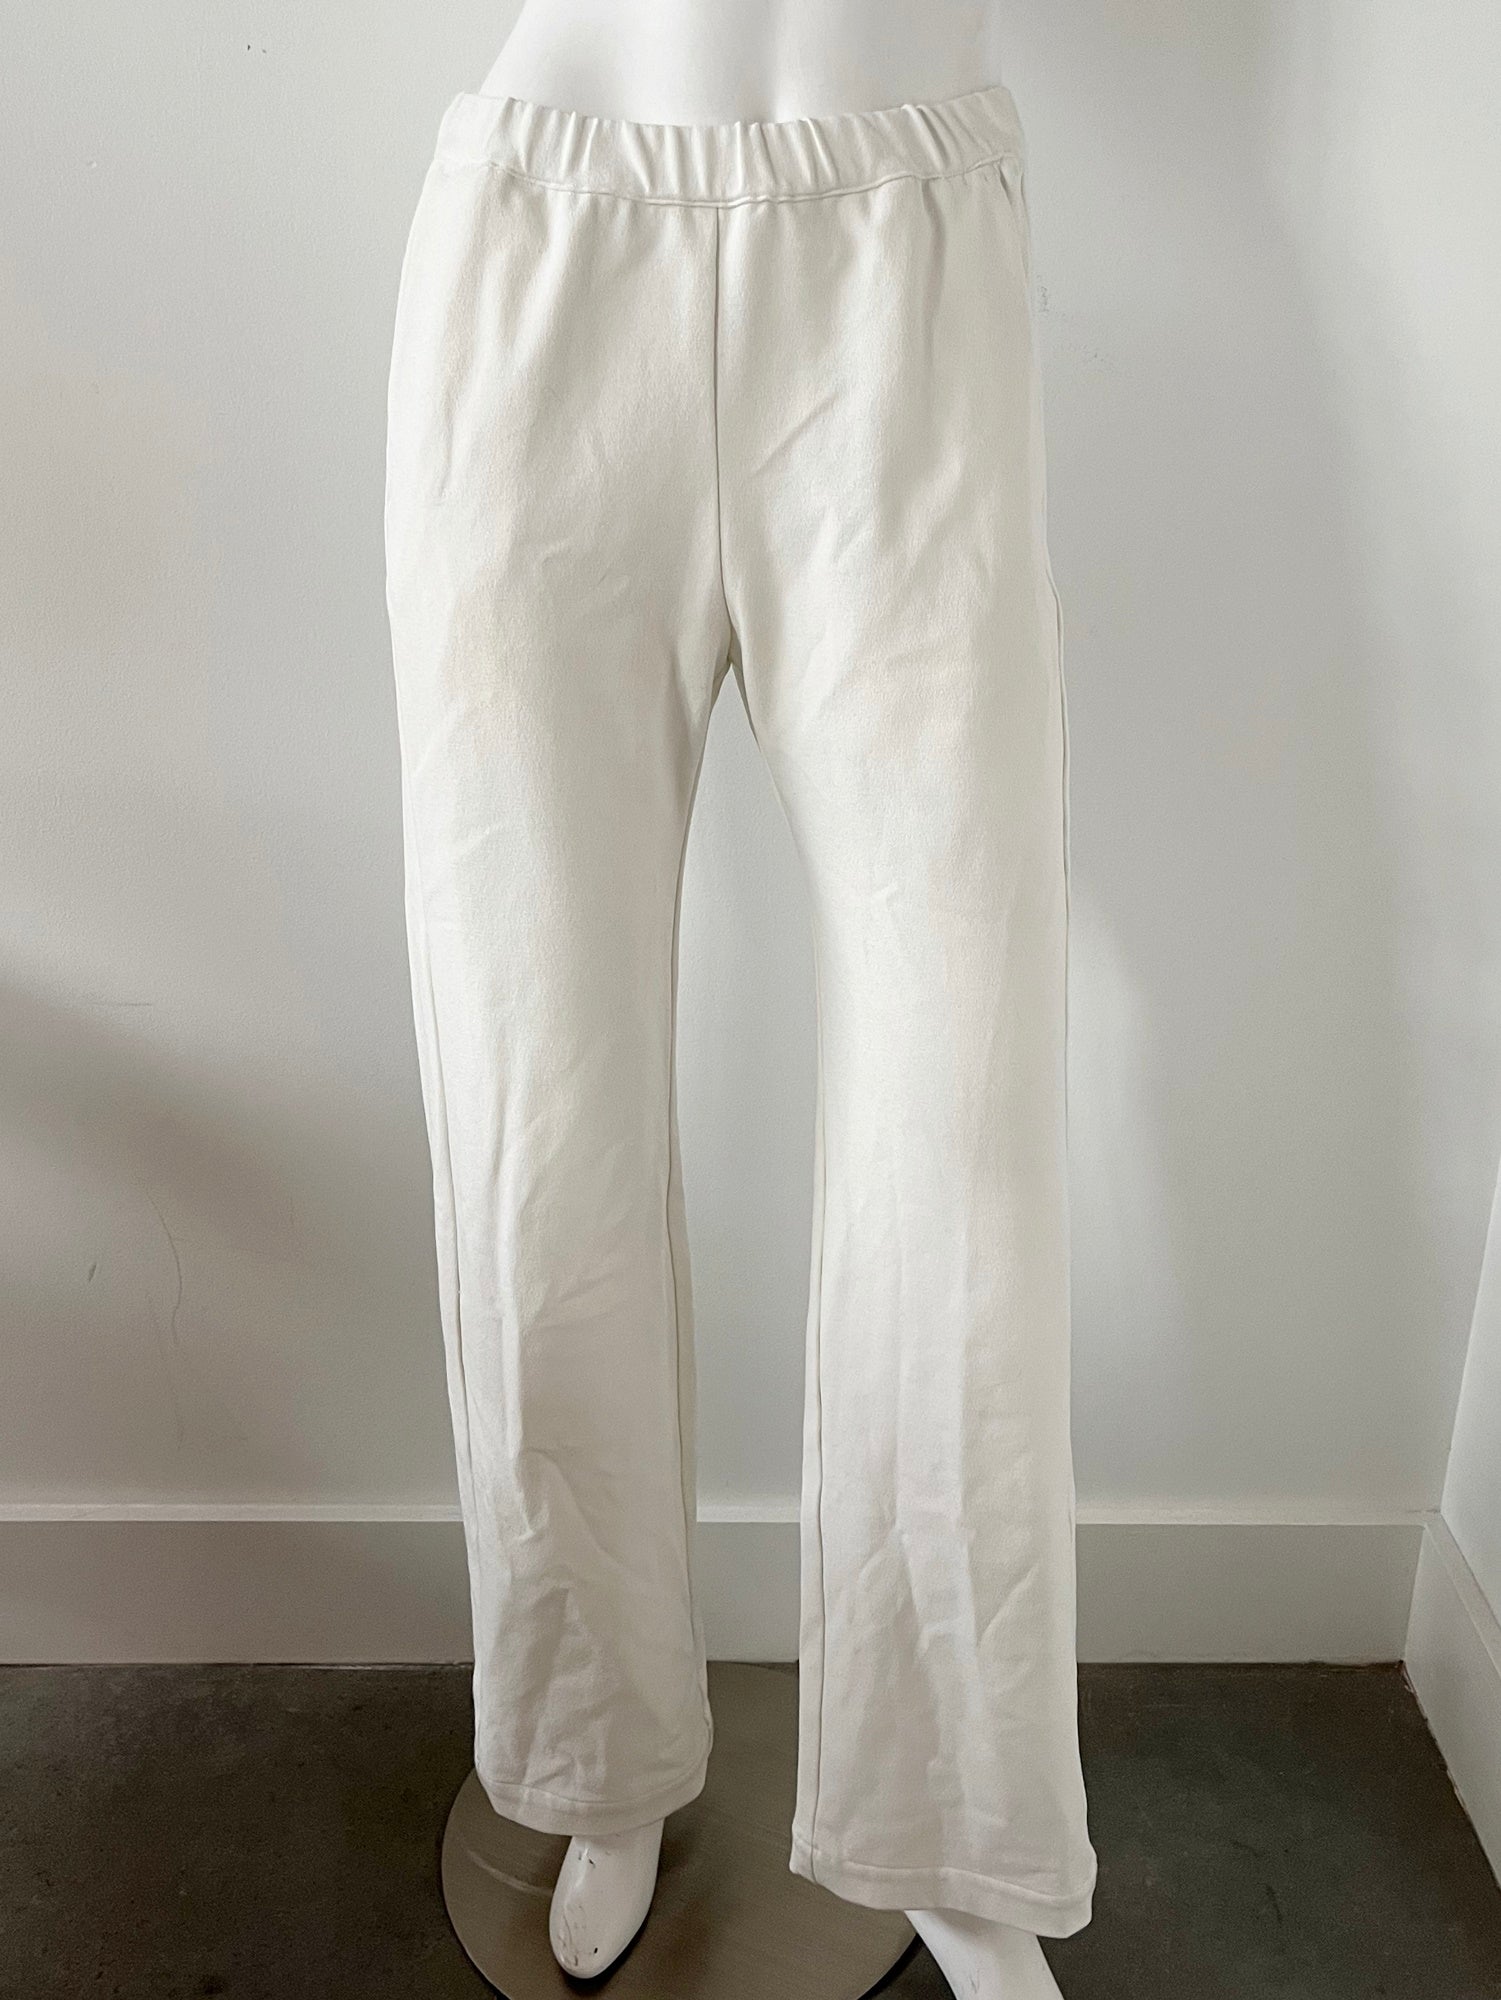 Crepe Everywhere Pants Size 0/XS